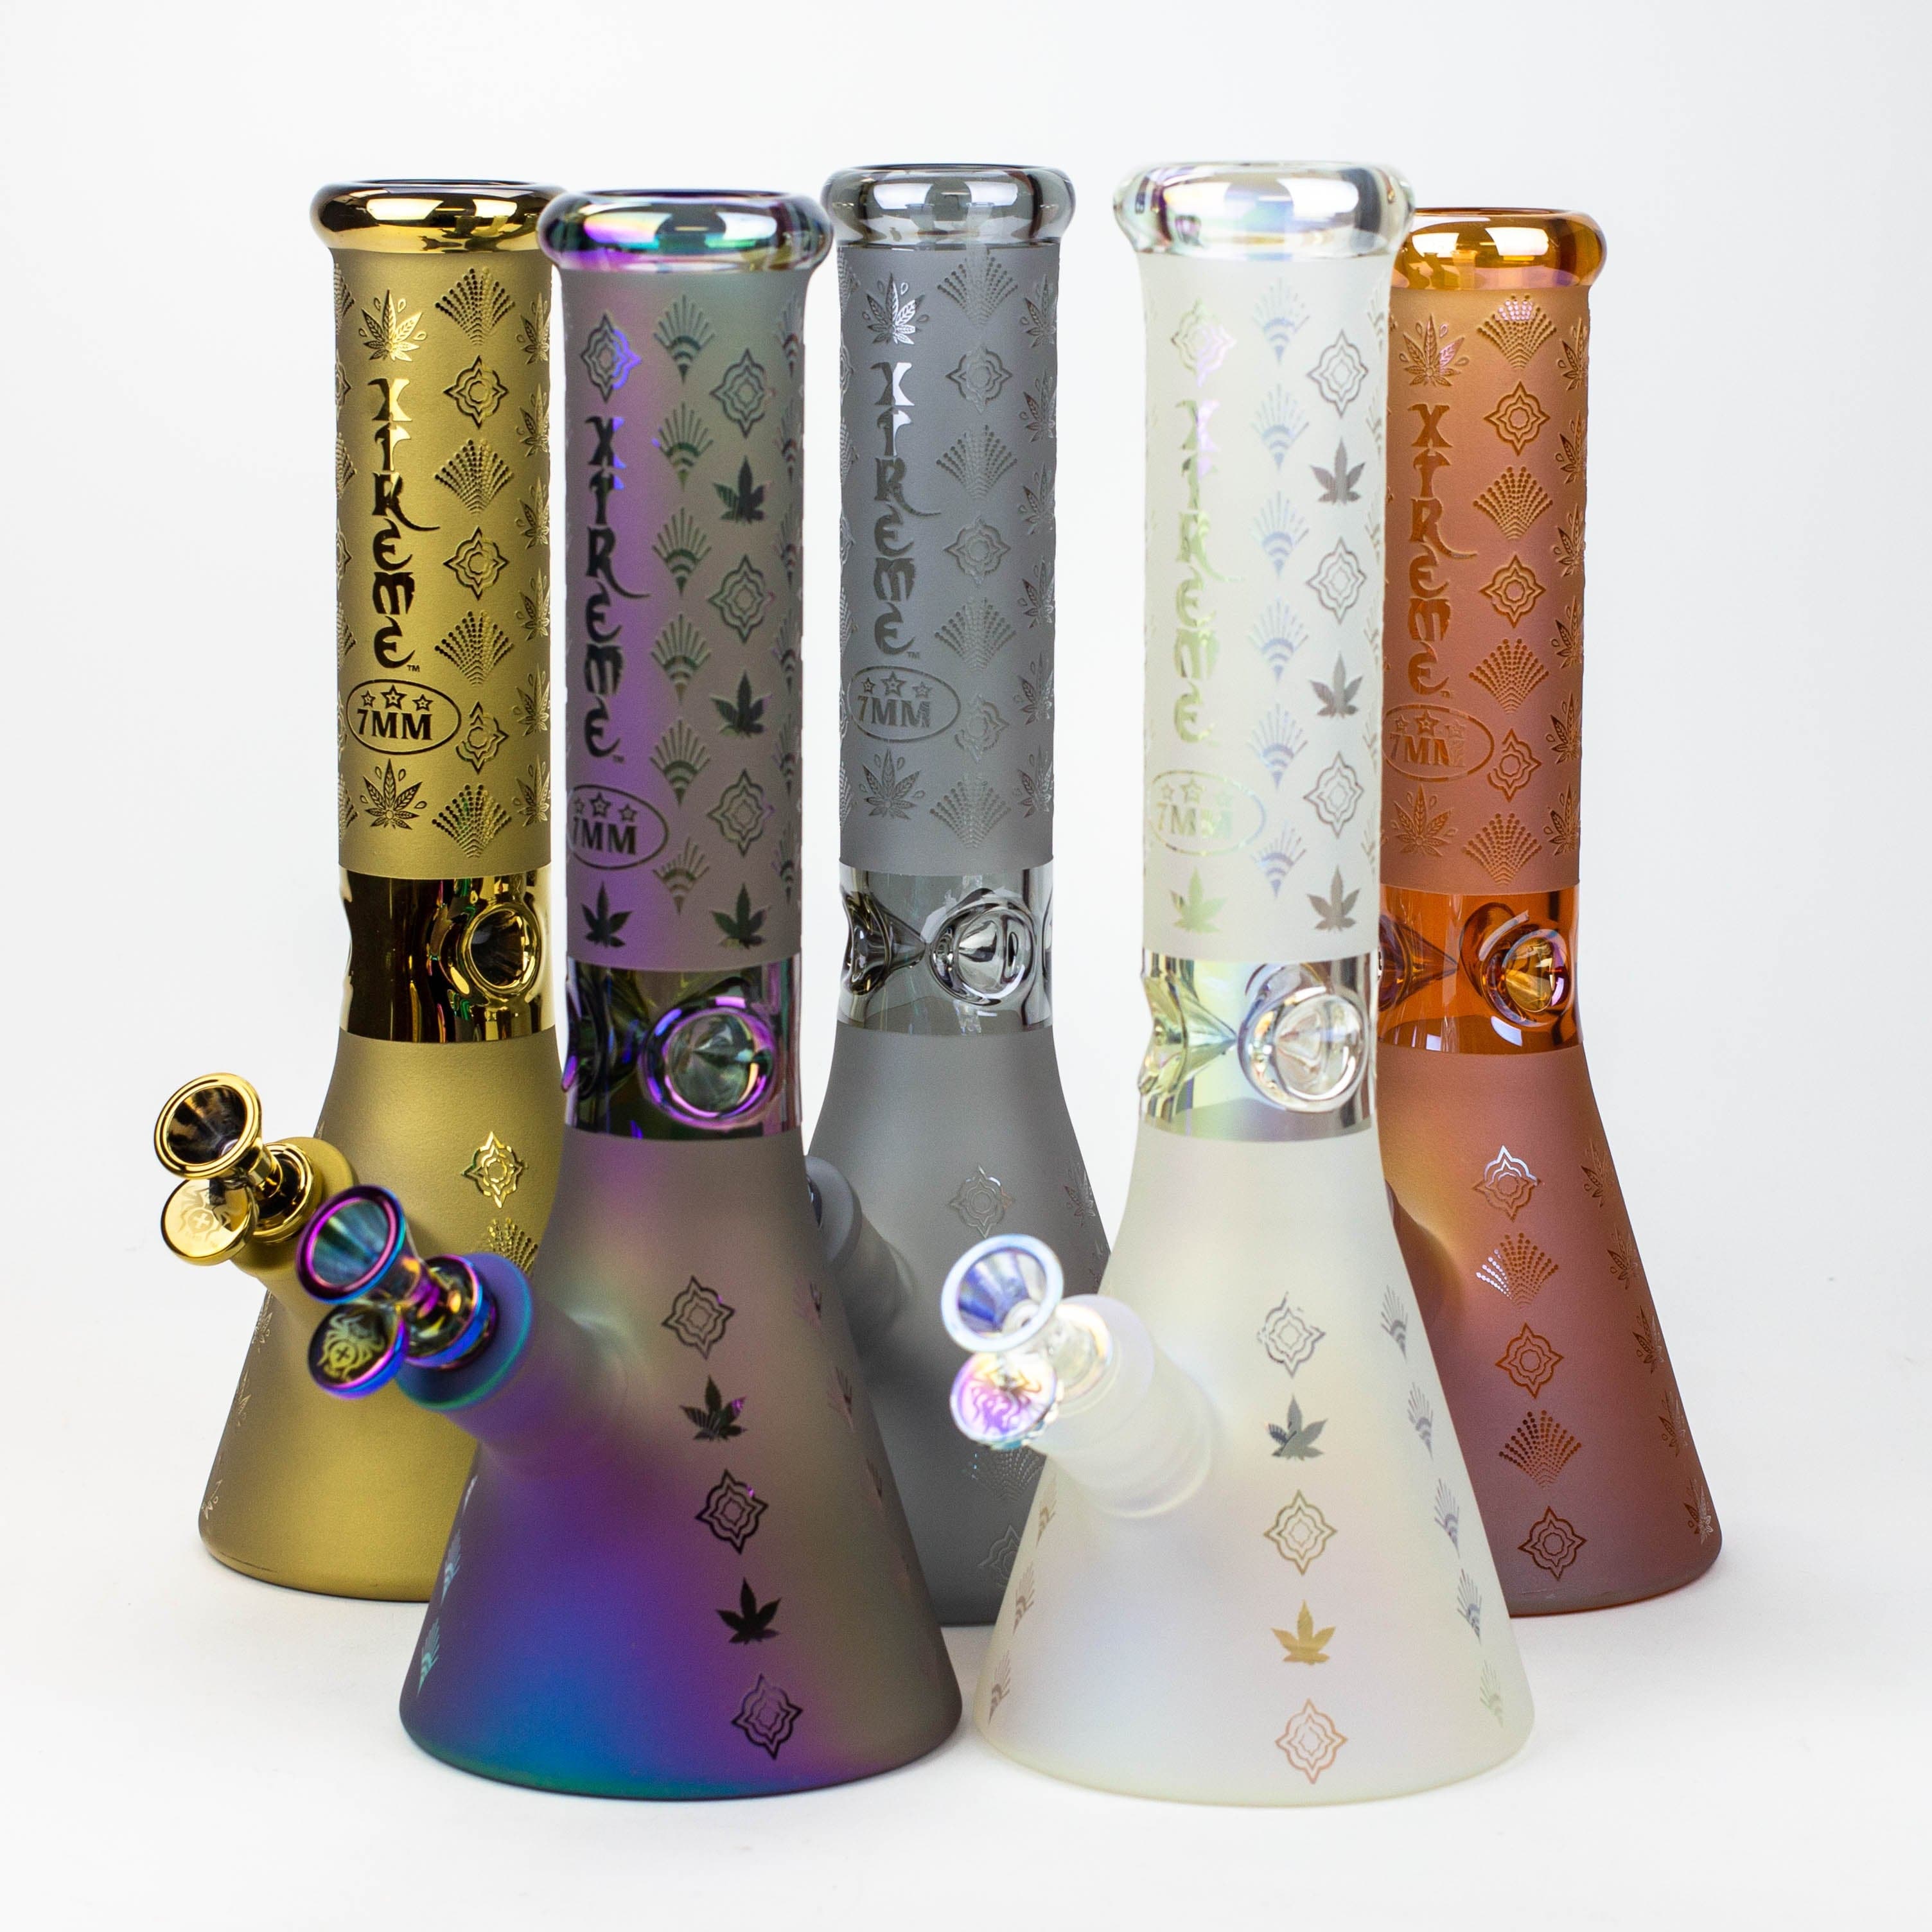 Xtreme glass sandblast electroplated glass beaker water pipes_0